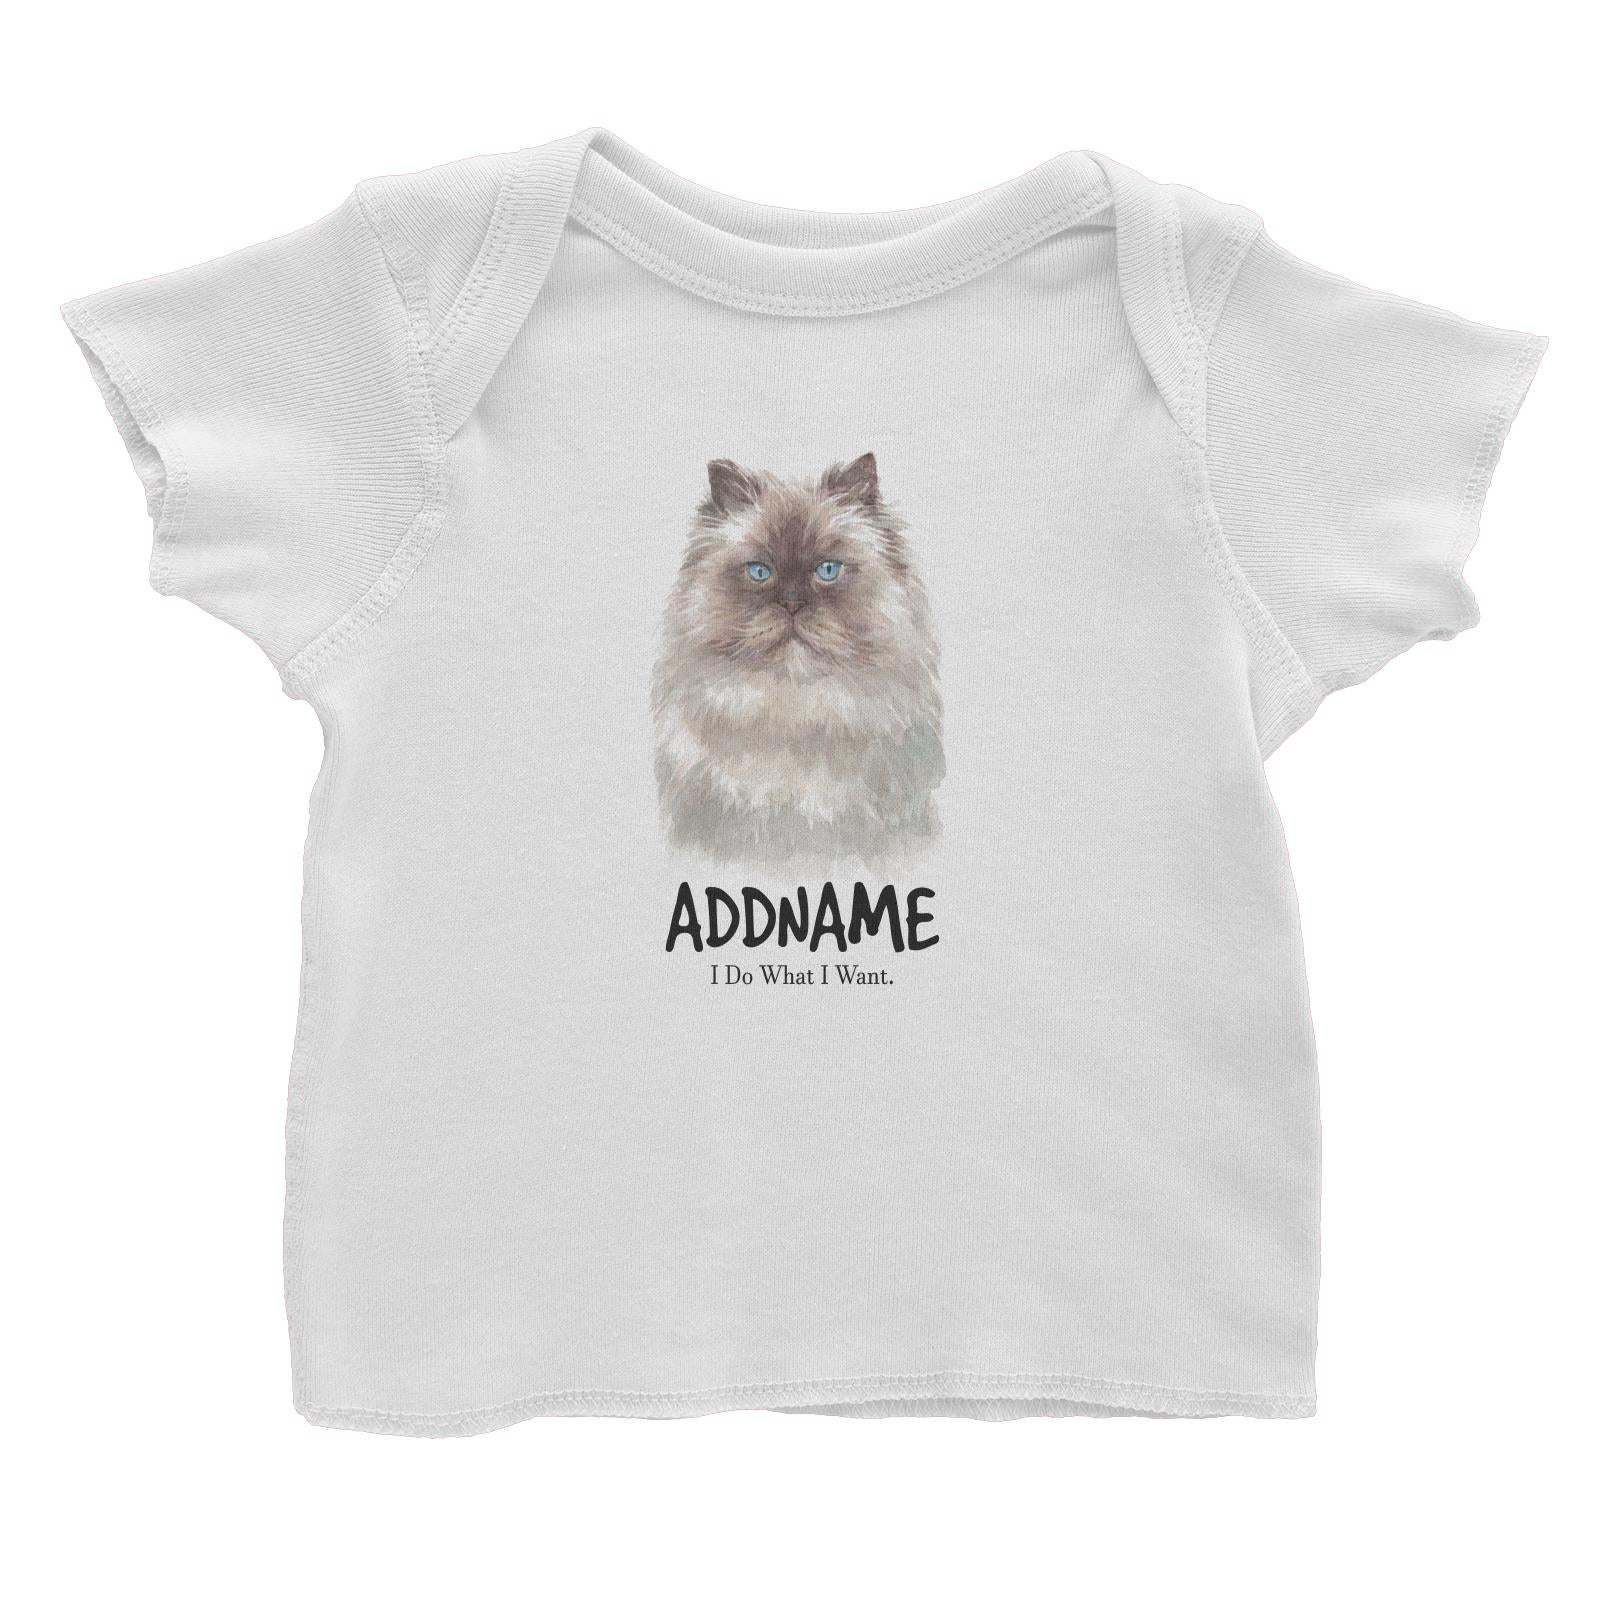 Watercolor Cat Himalayan Dark Face I Do What I Want Addname Baby T-Shirt